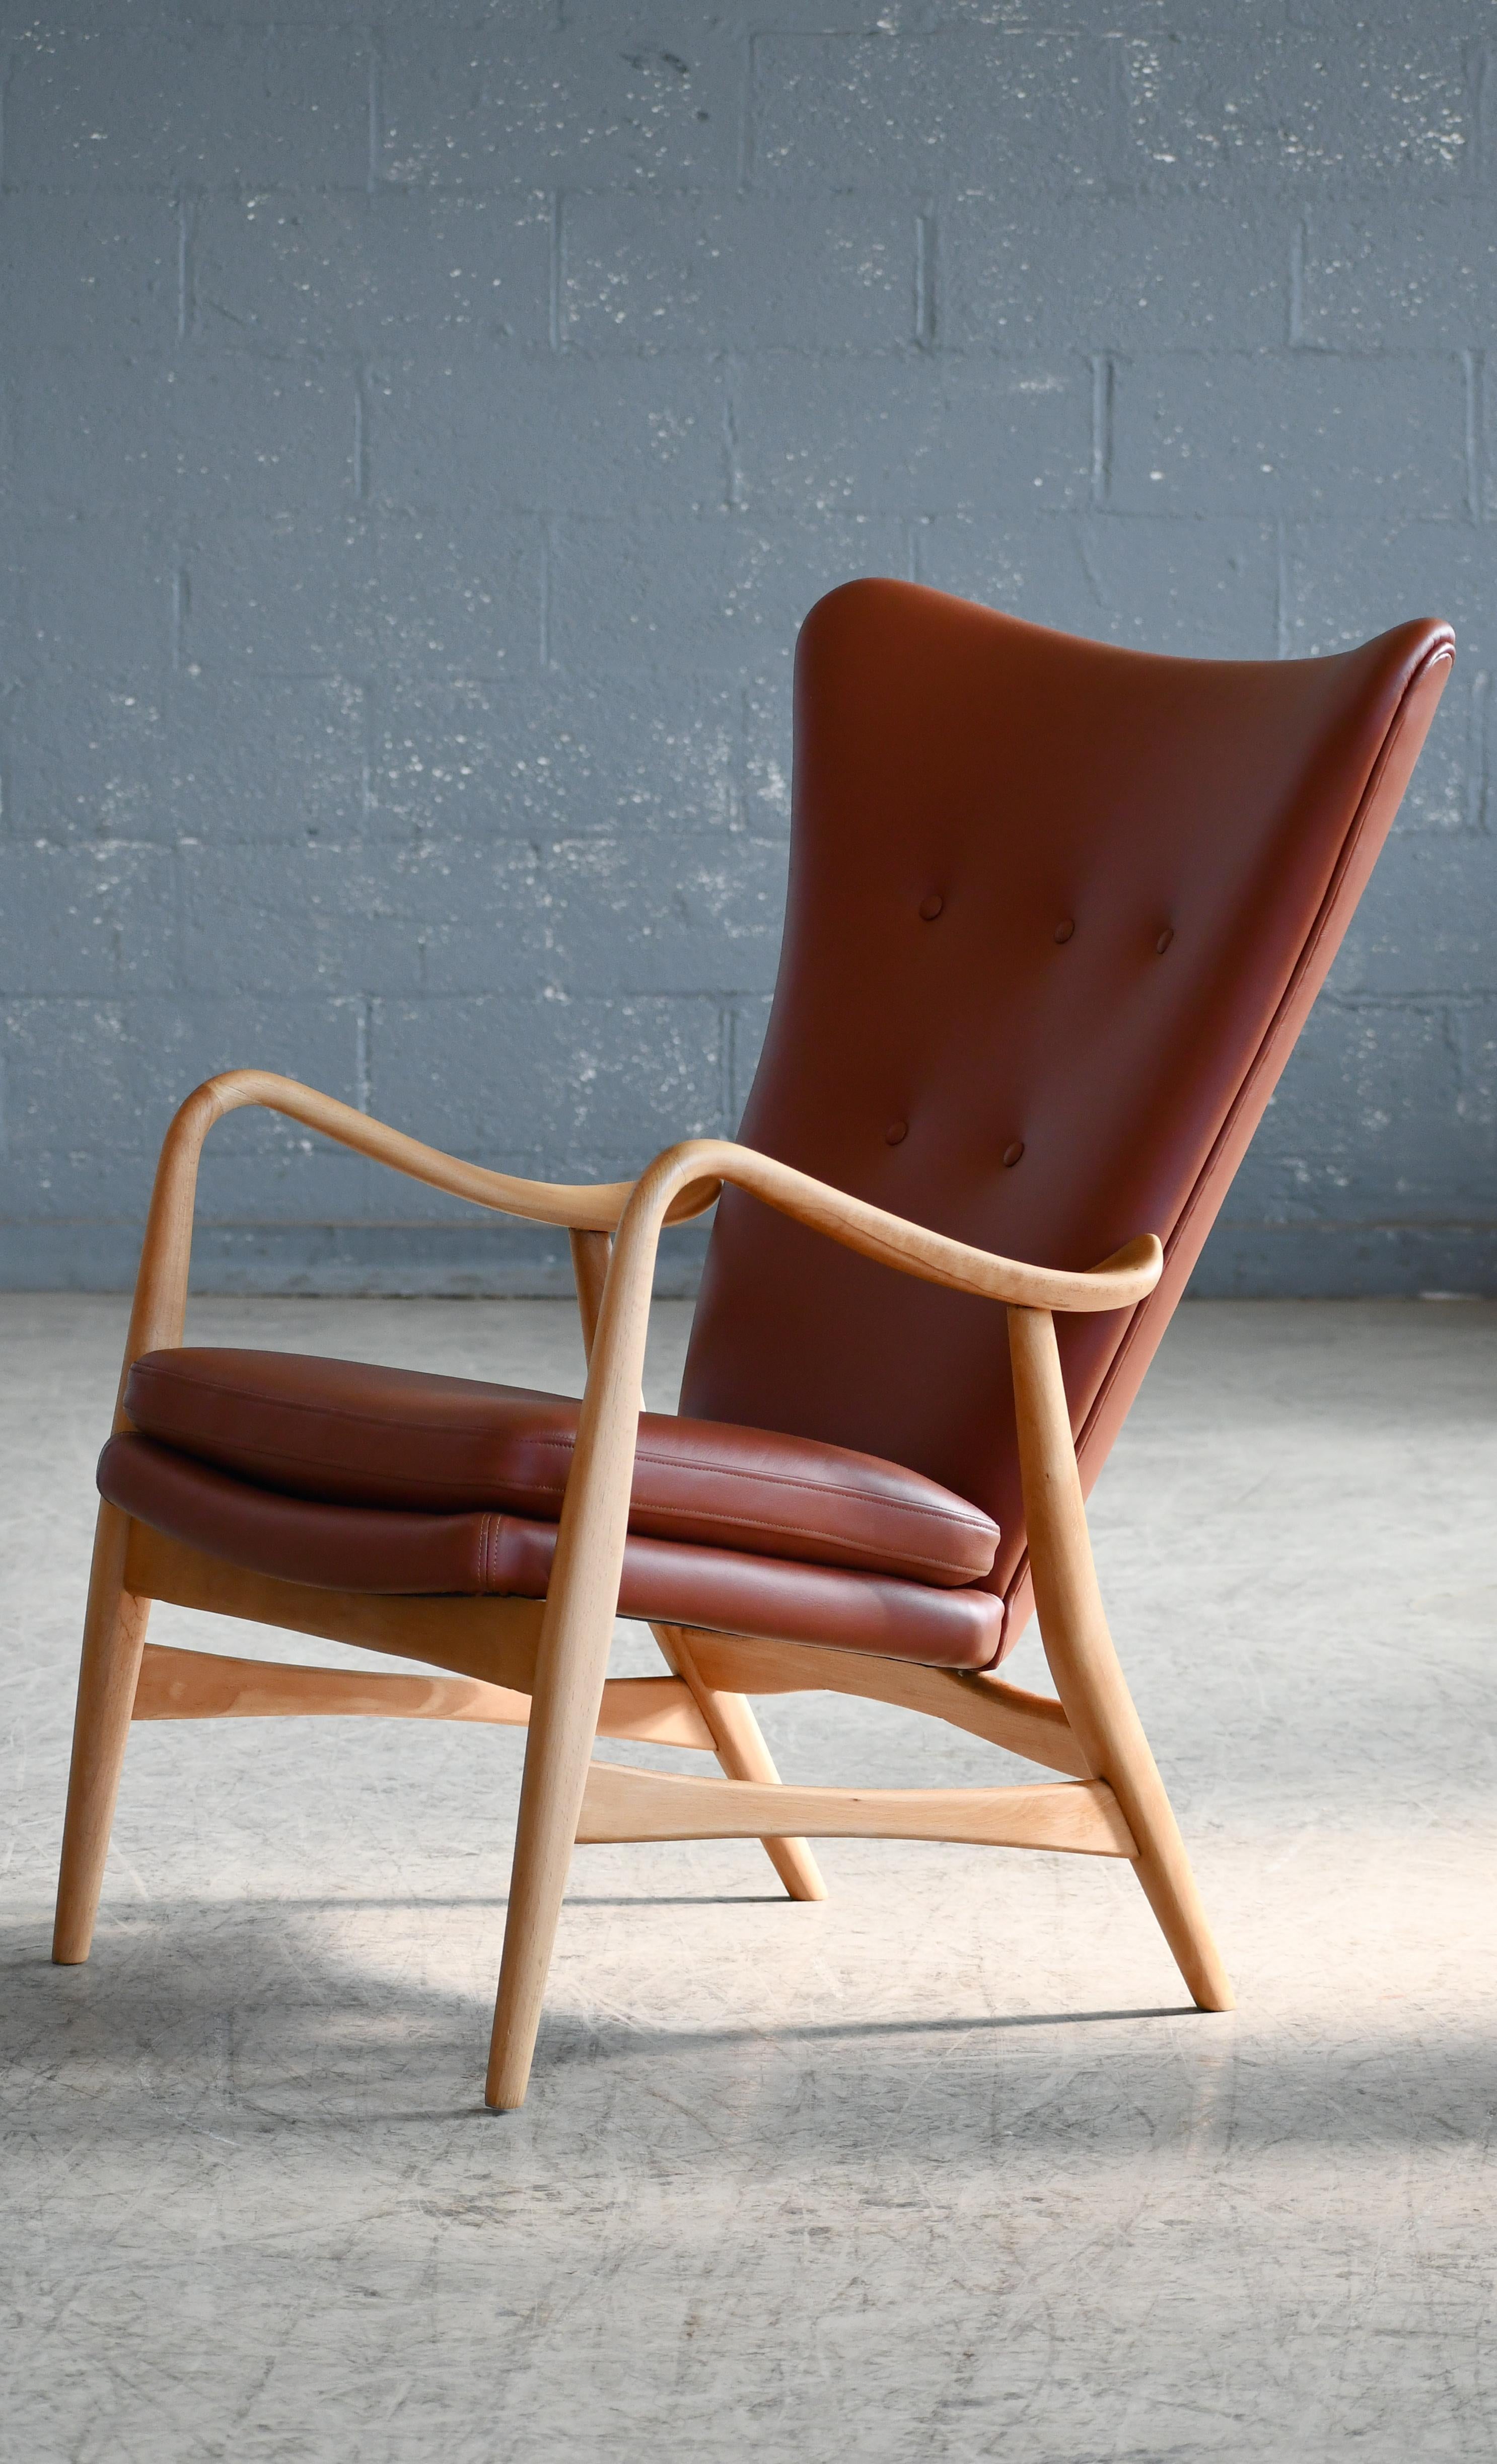 Mid-20th Century Danish Easy chair with Beech Frame Reupholstered in a Light Brown Leather, 1950s For Sale